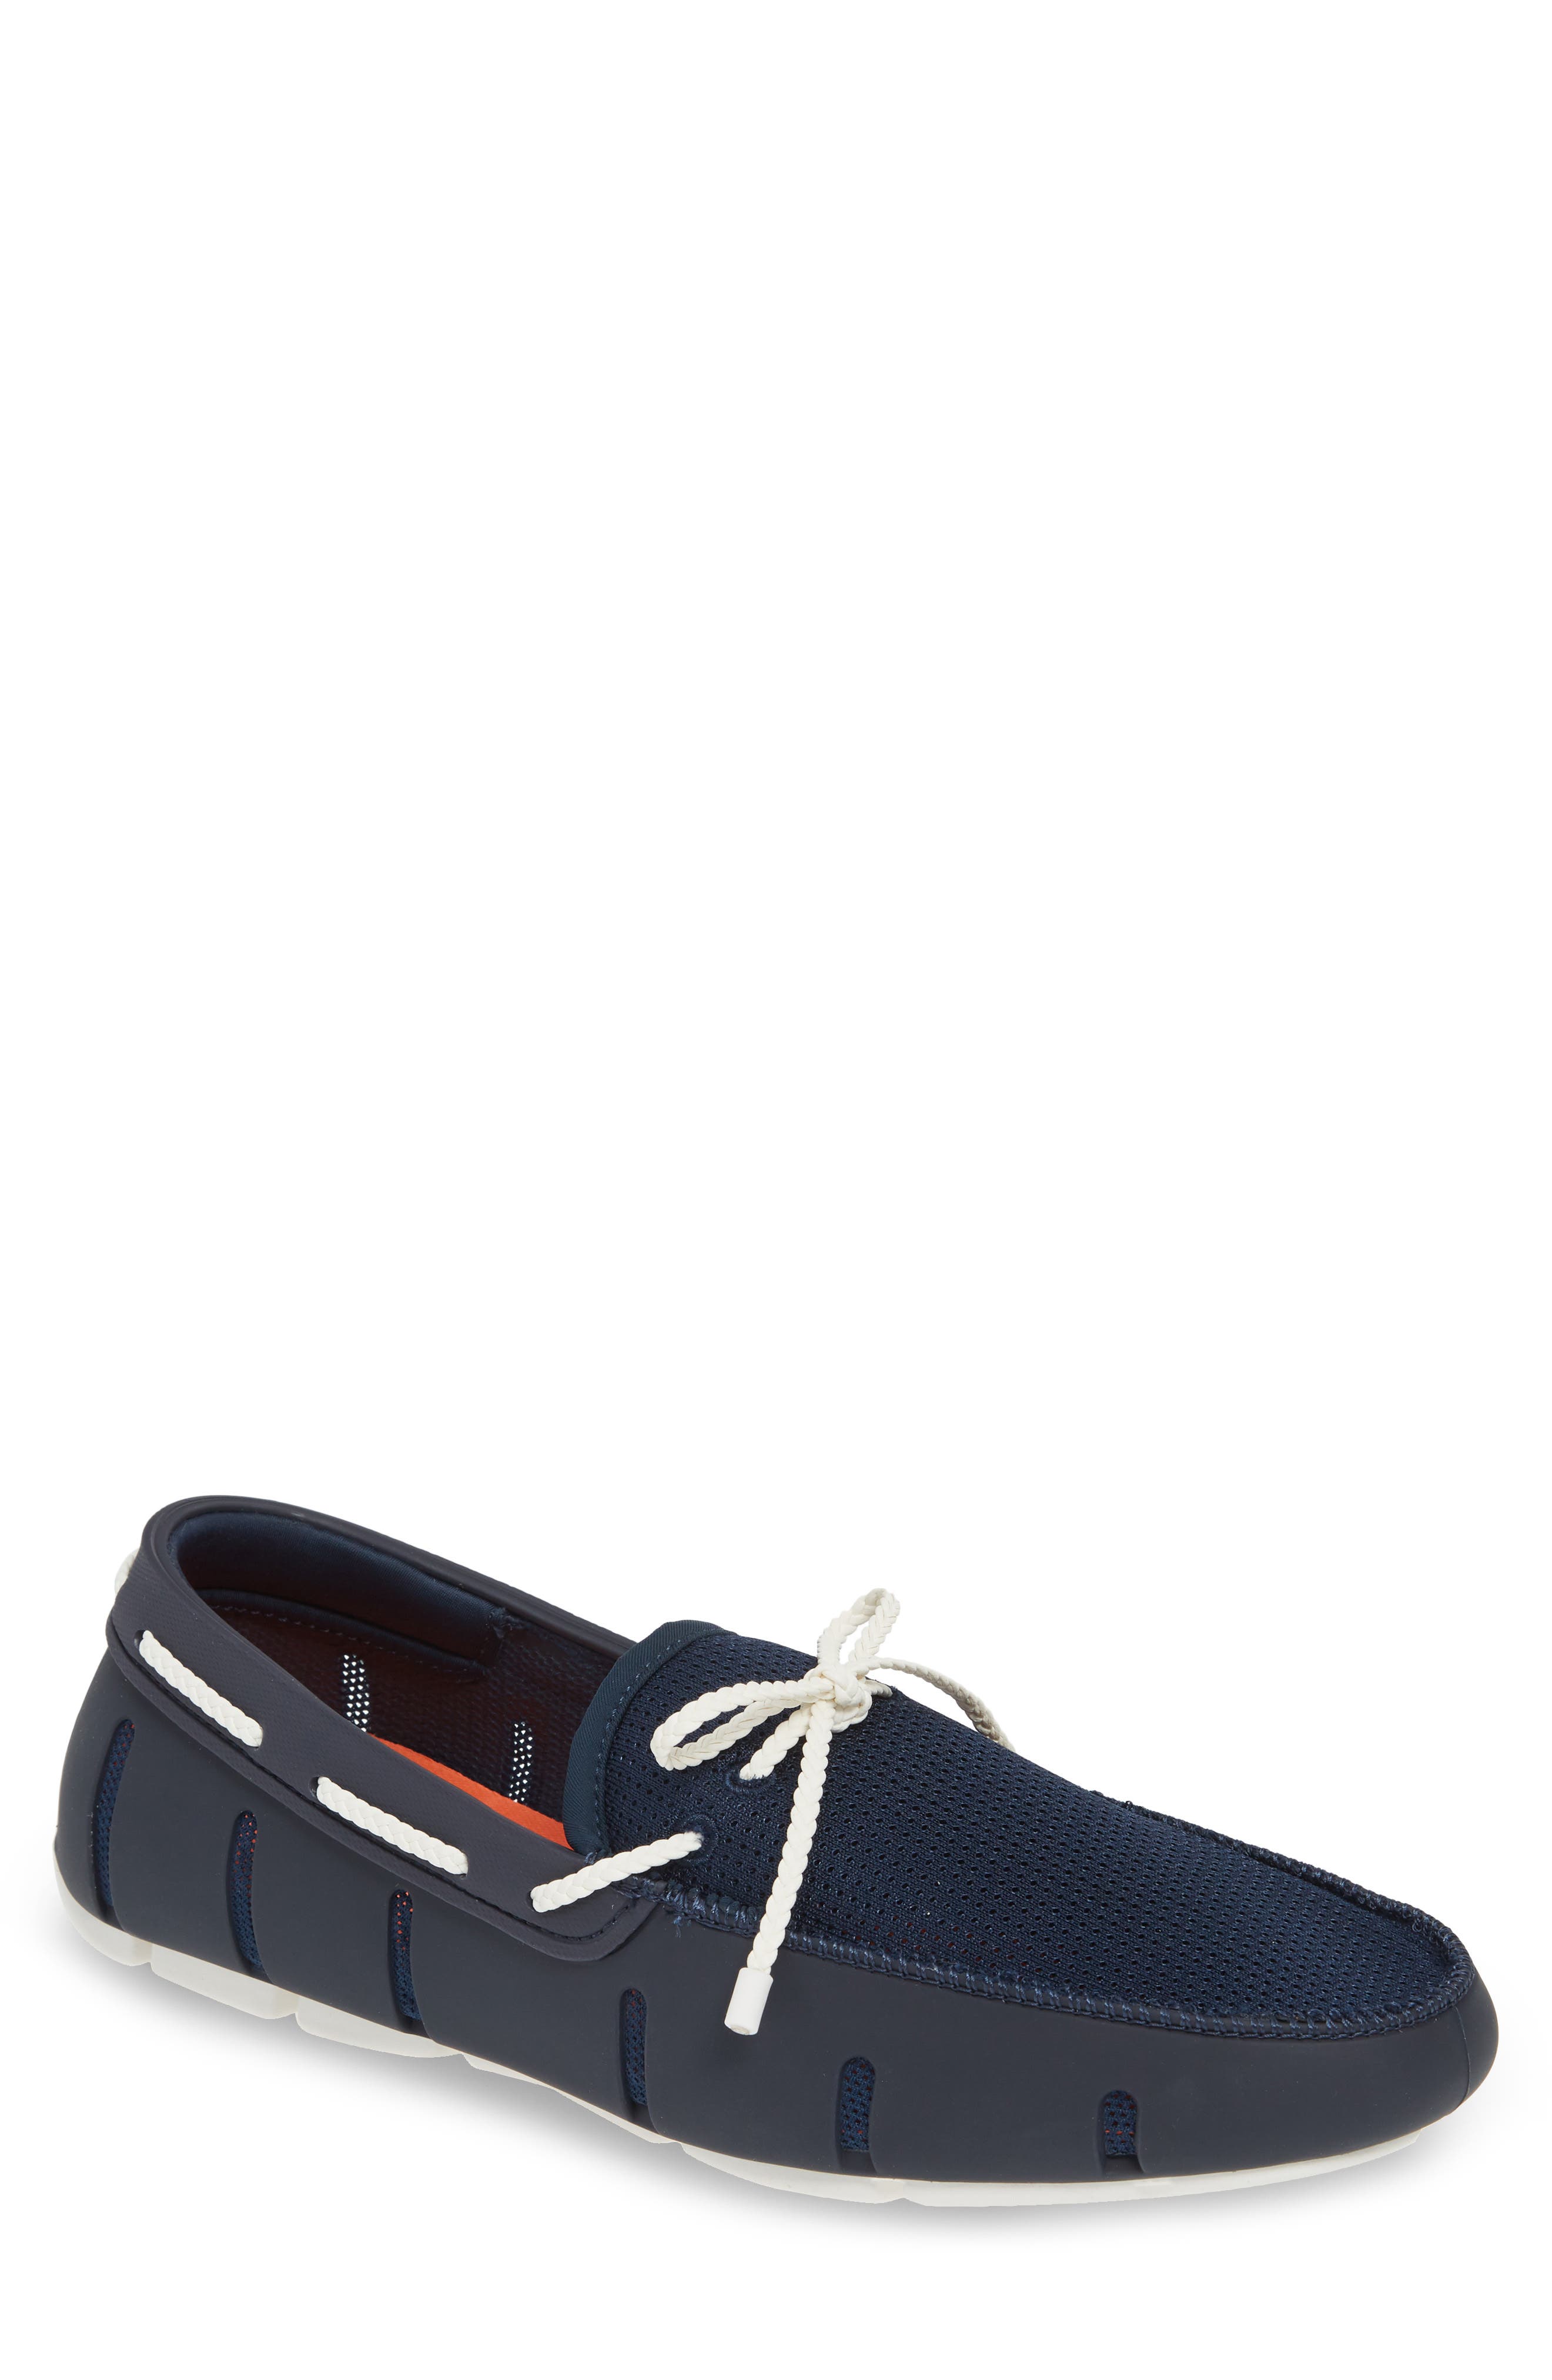 swims mens loafers